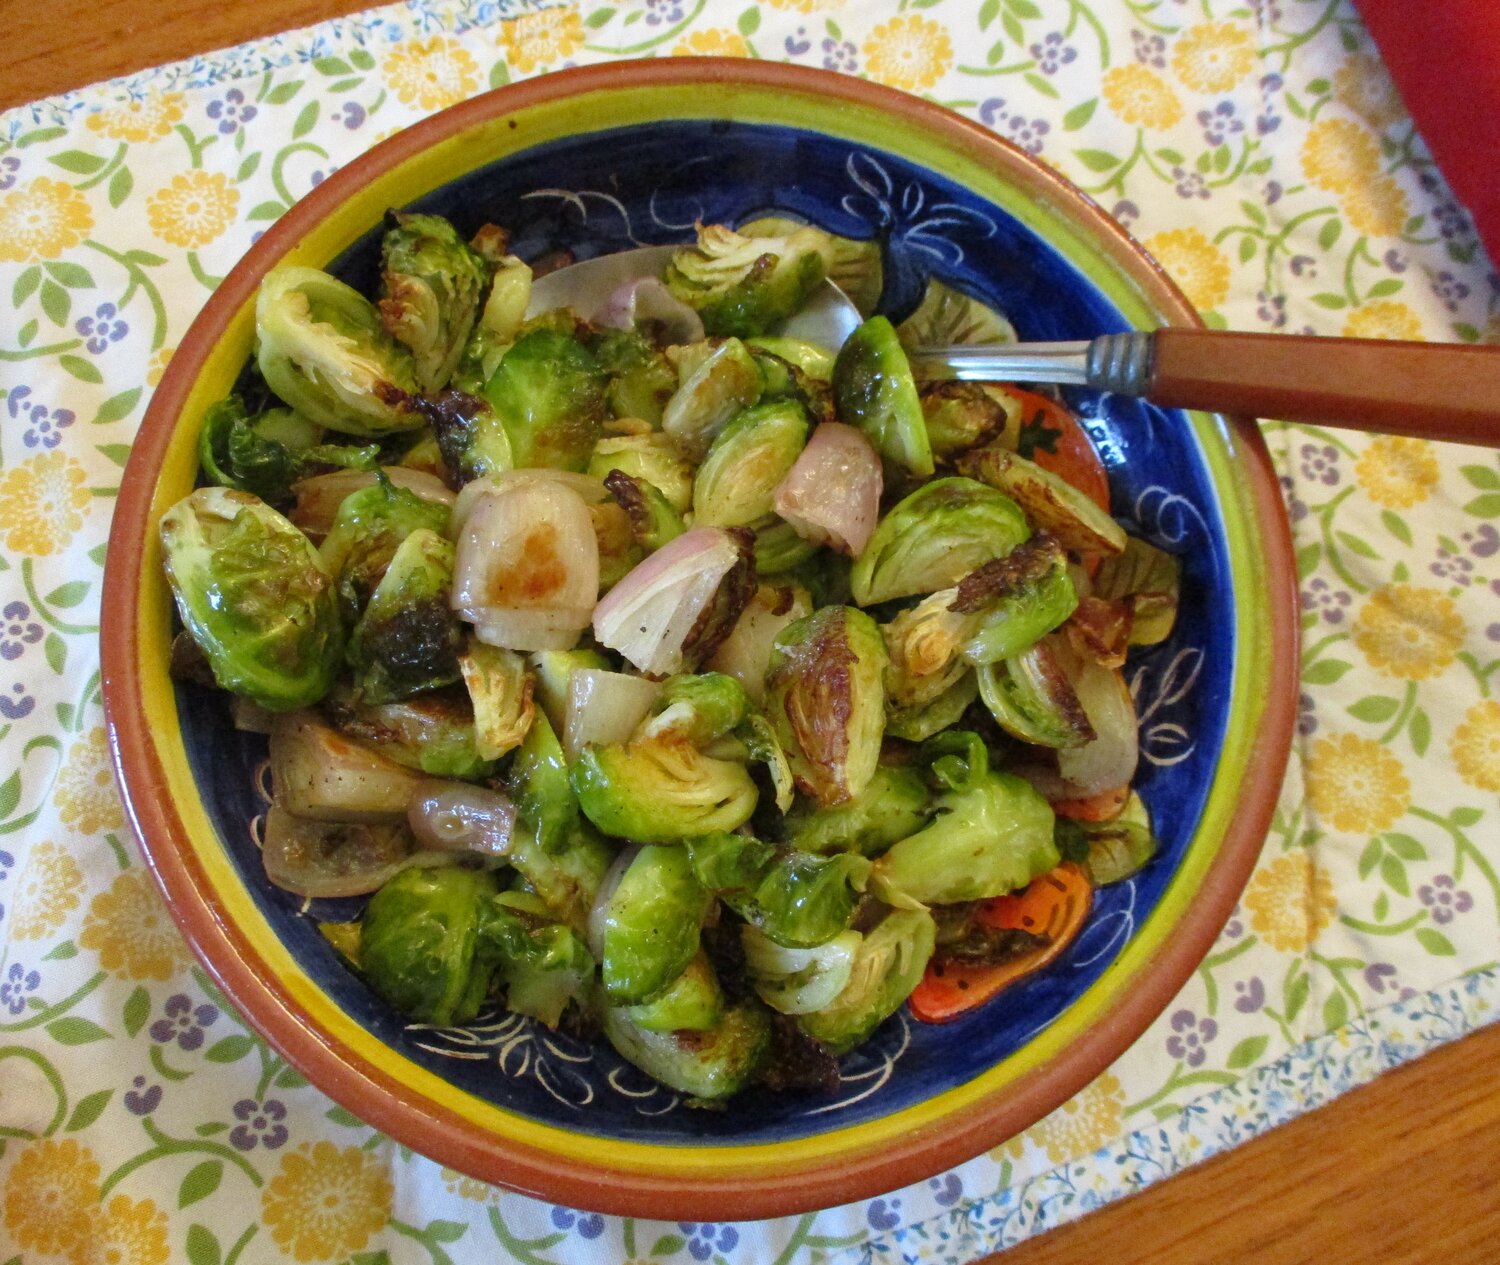 Oven-roasted Brussels sprouts and shallots